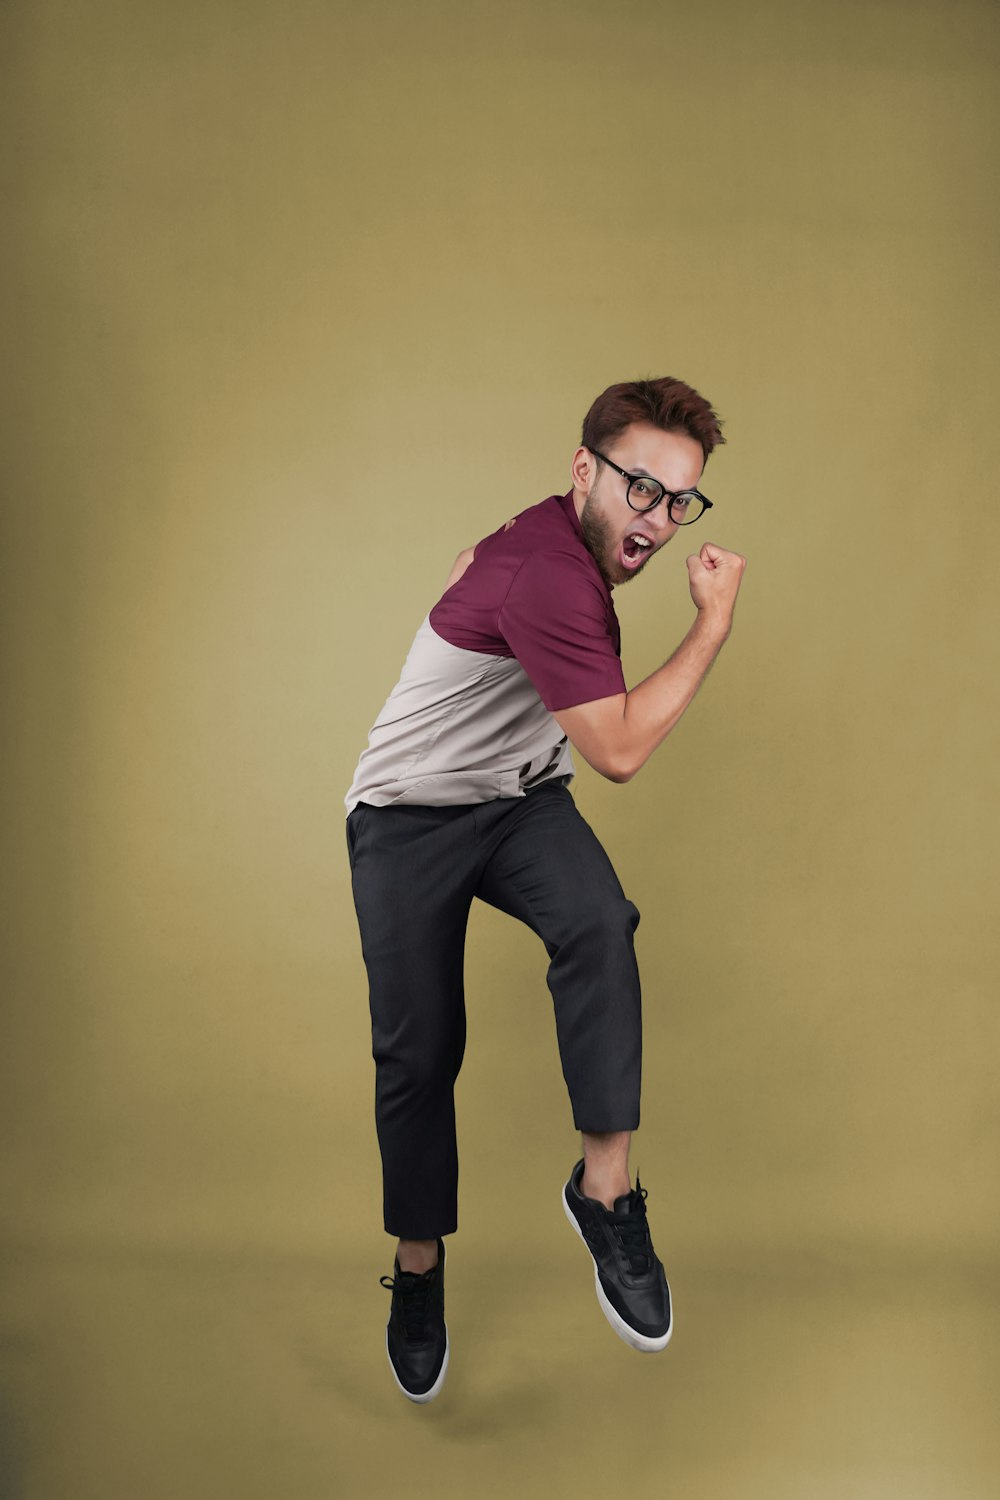 a man jumping in the air while wearing glasses